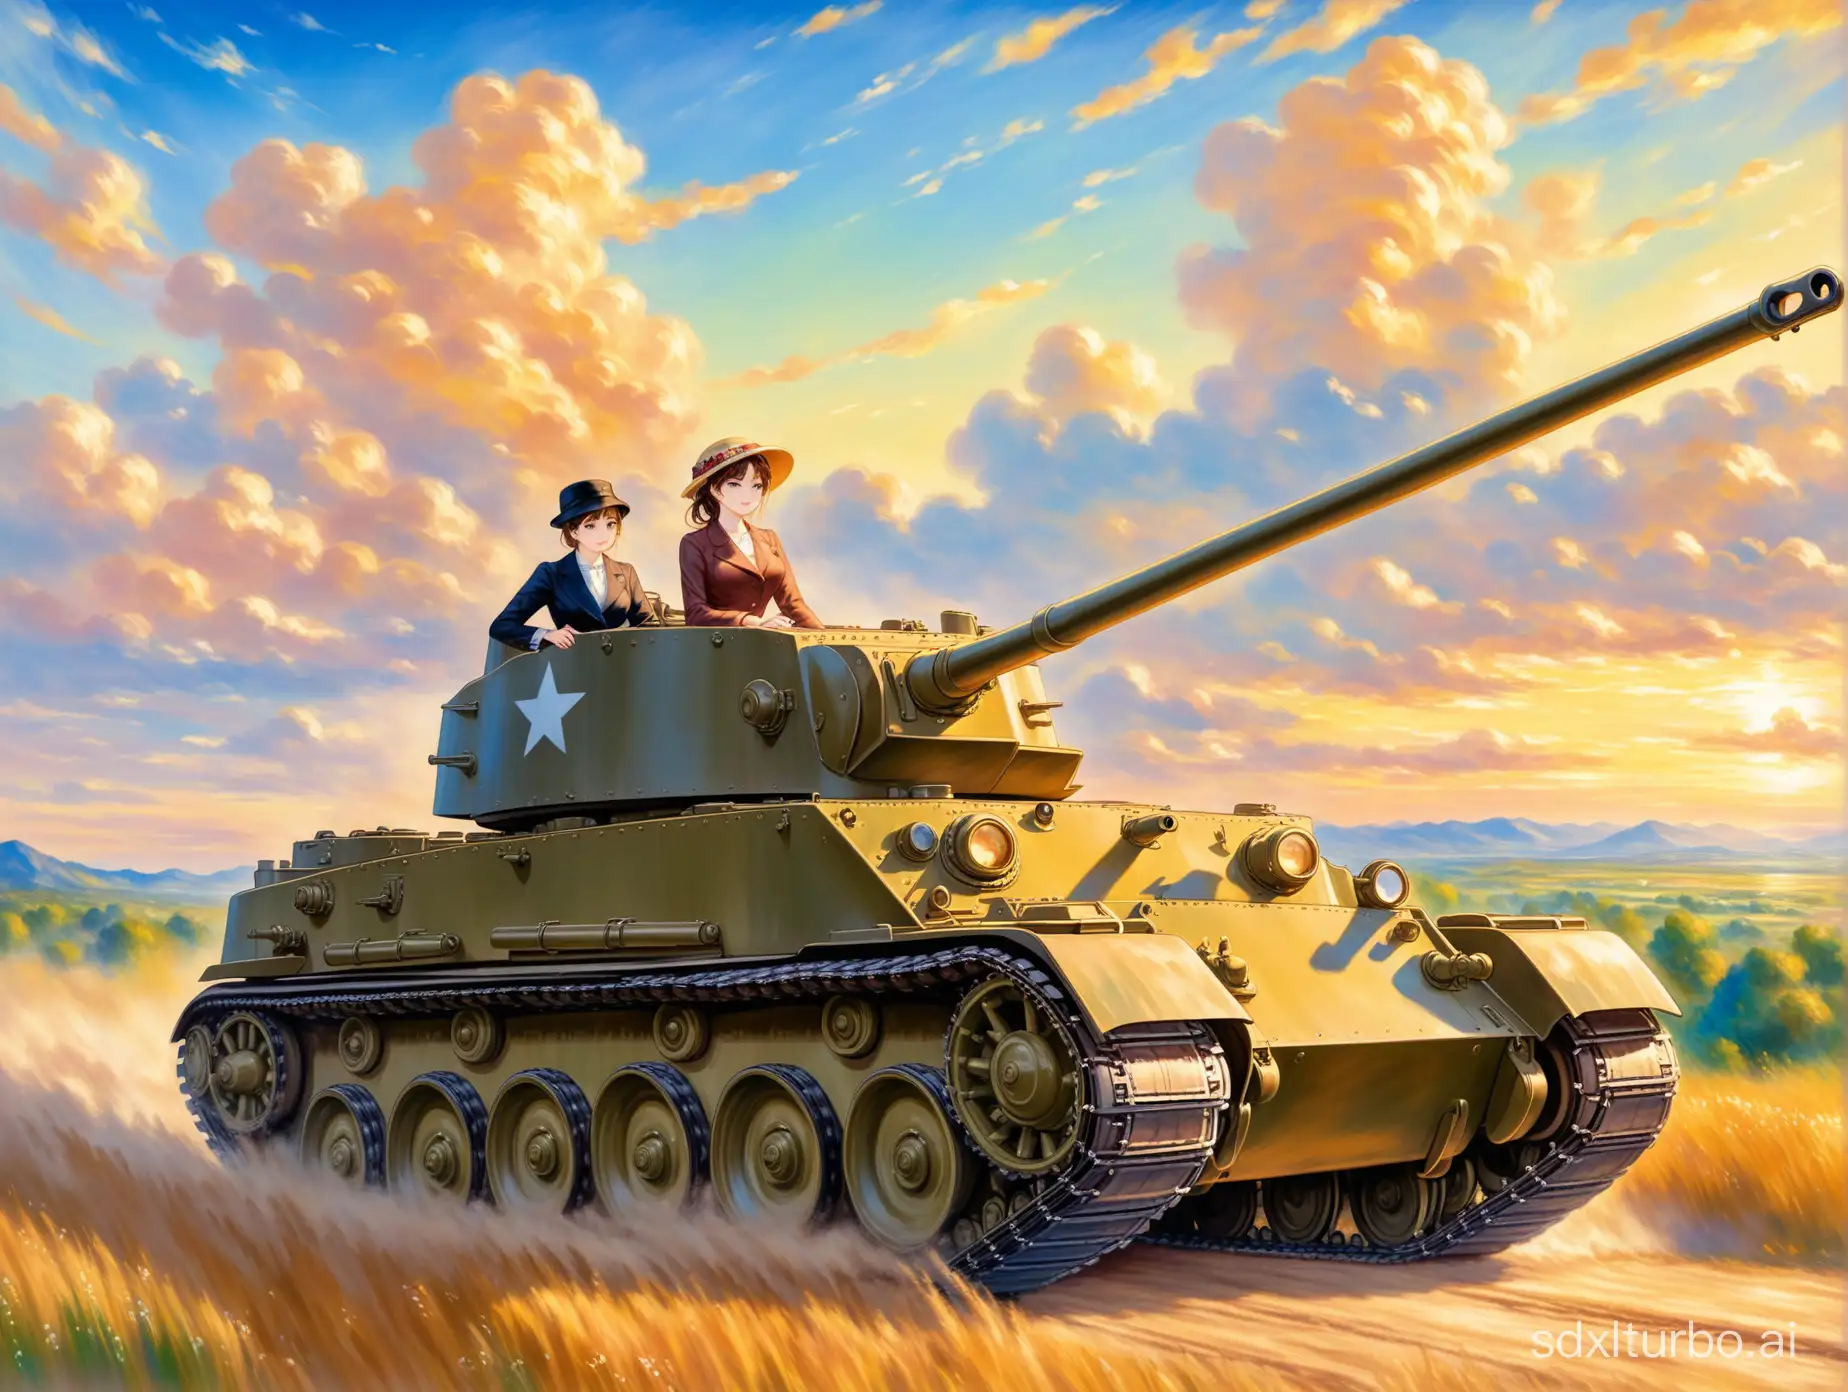 Anime-Style-Oil-Painting-Woman-in-Suit-Riding-M4-Sherman-Tank-Amid-Majestic-Scenery